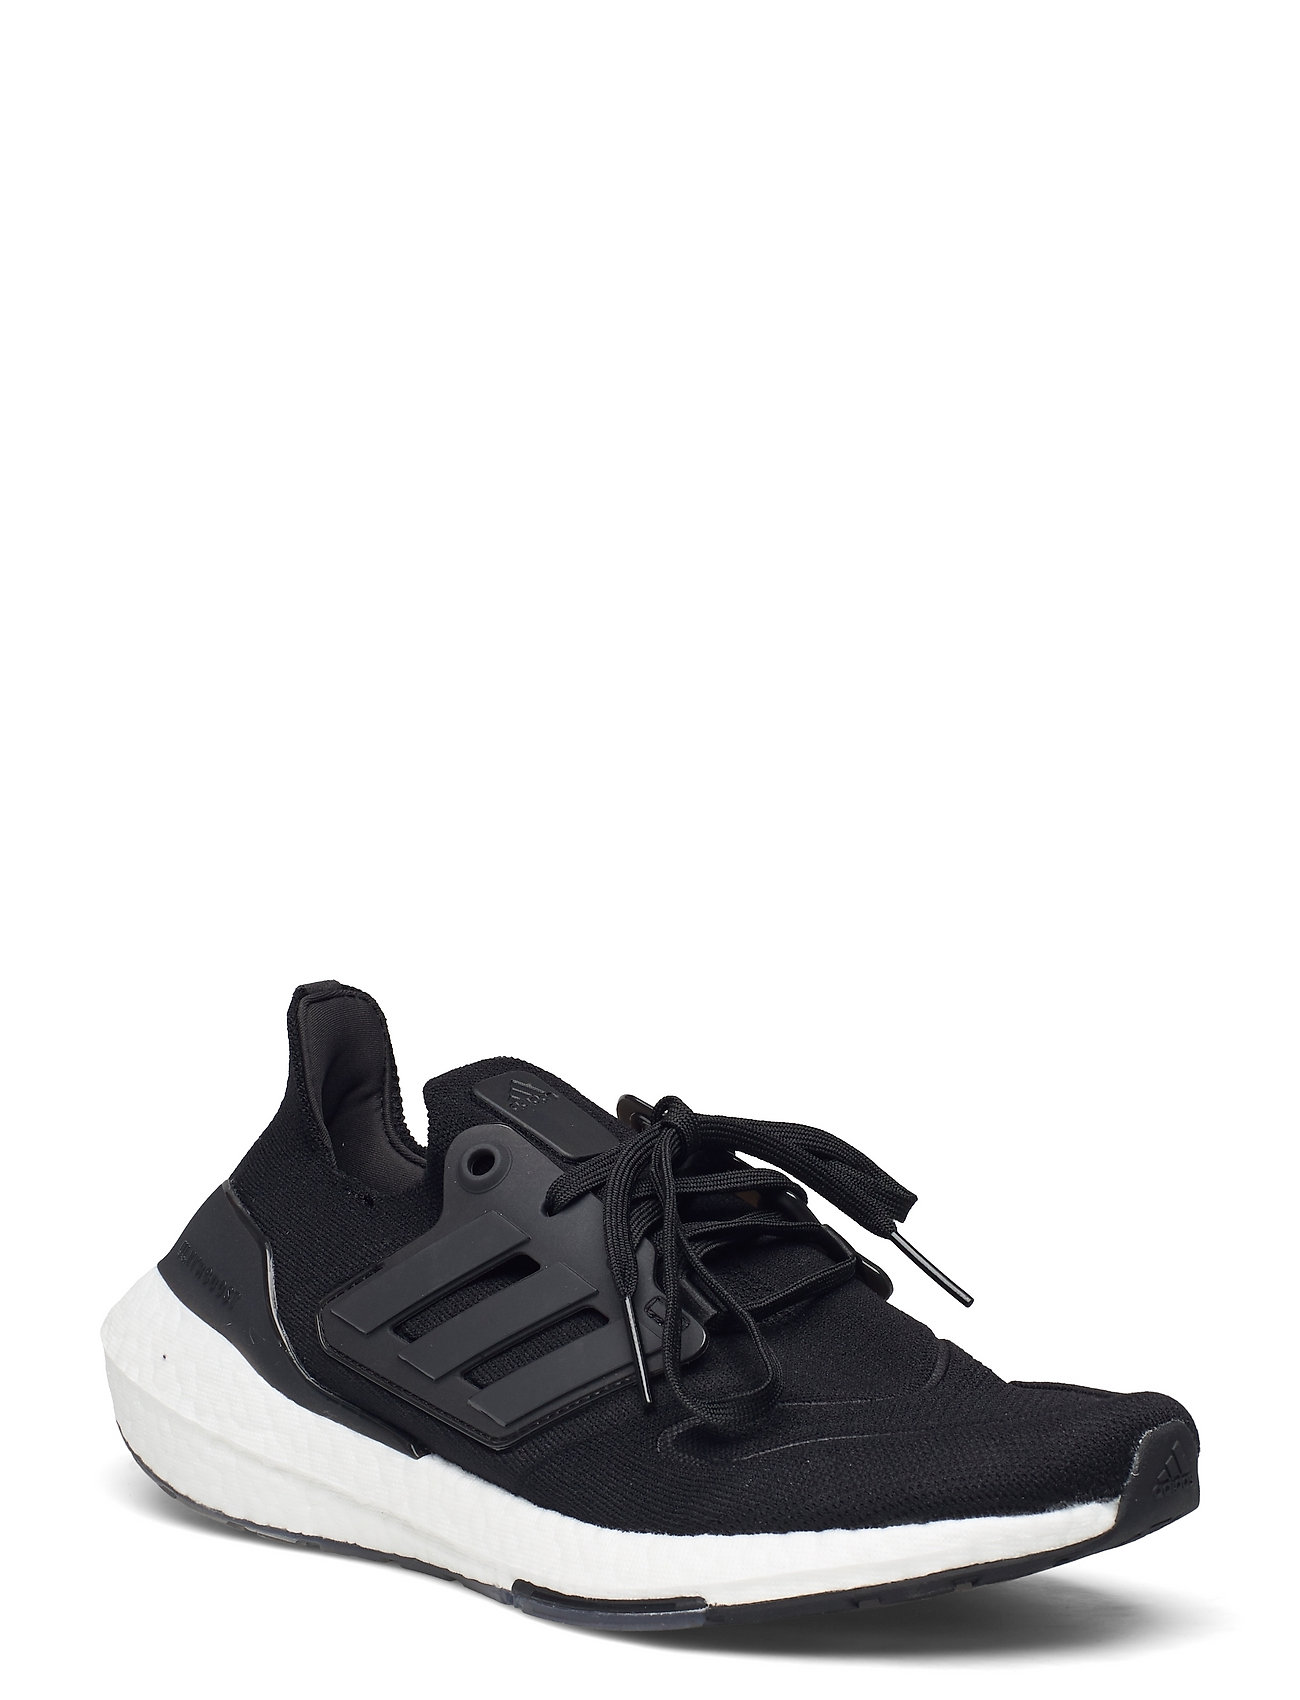 Ultraboost 22 Shoes Shoes Sport Shoes Running Shoes Black Adidas Performance